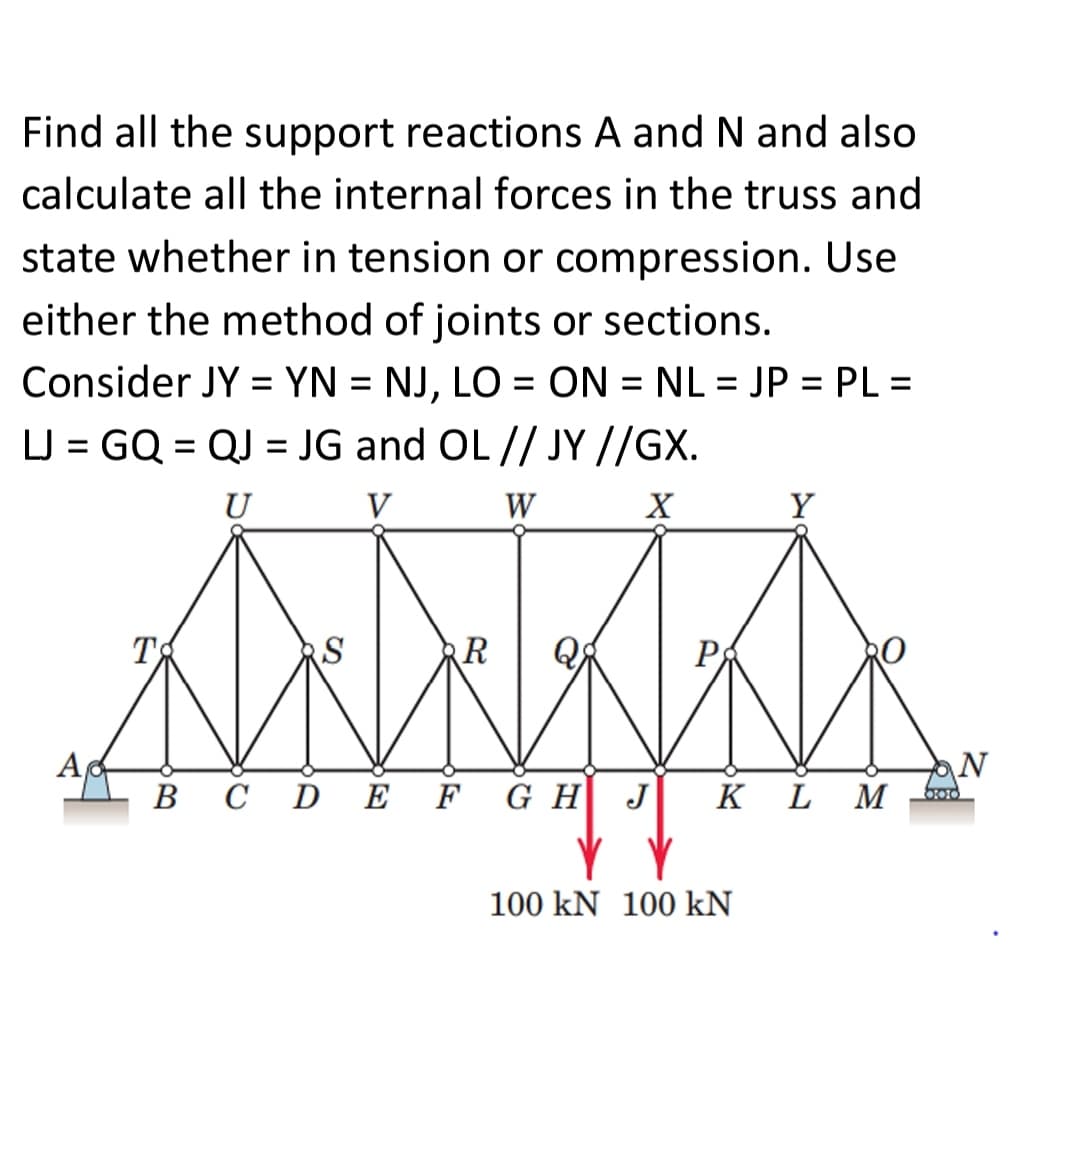 Find all the support reactions A and N and also
calculate all the internal forces in the truss and
state whether in tension or compression. Use
either the method of joints or sections.
Consider JY = YN = NJ, LO = ON = NL = JP = PL =
%3D
%3D
LJ = GQ = QJ = JG and OL // JY //GX.
U
V
W
Y
T
RS
R
P
N
M
В С
DE
F G H
J
K
L
100 kN 100 kN
